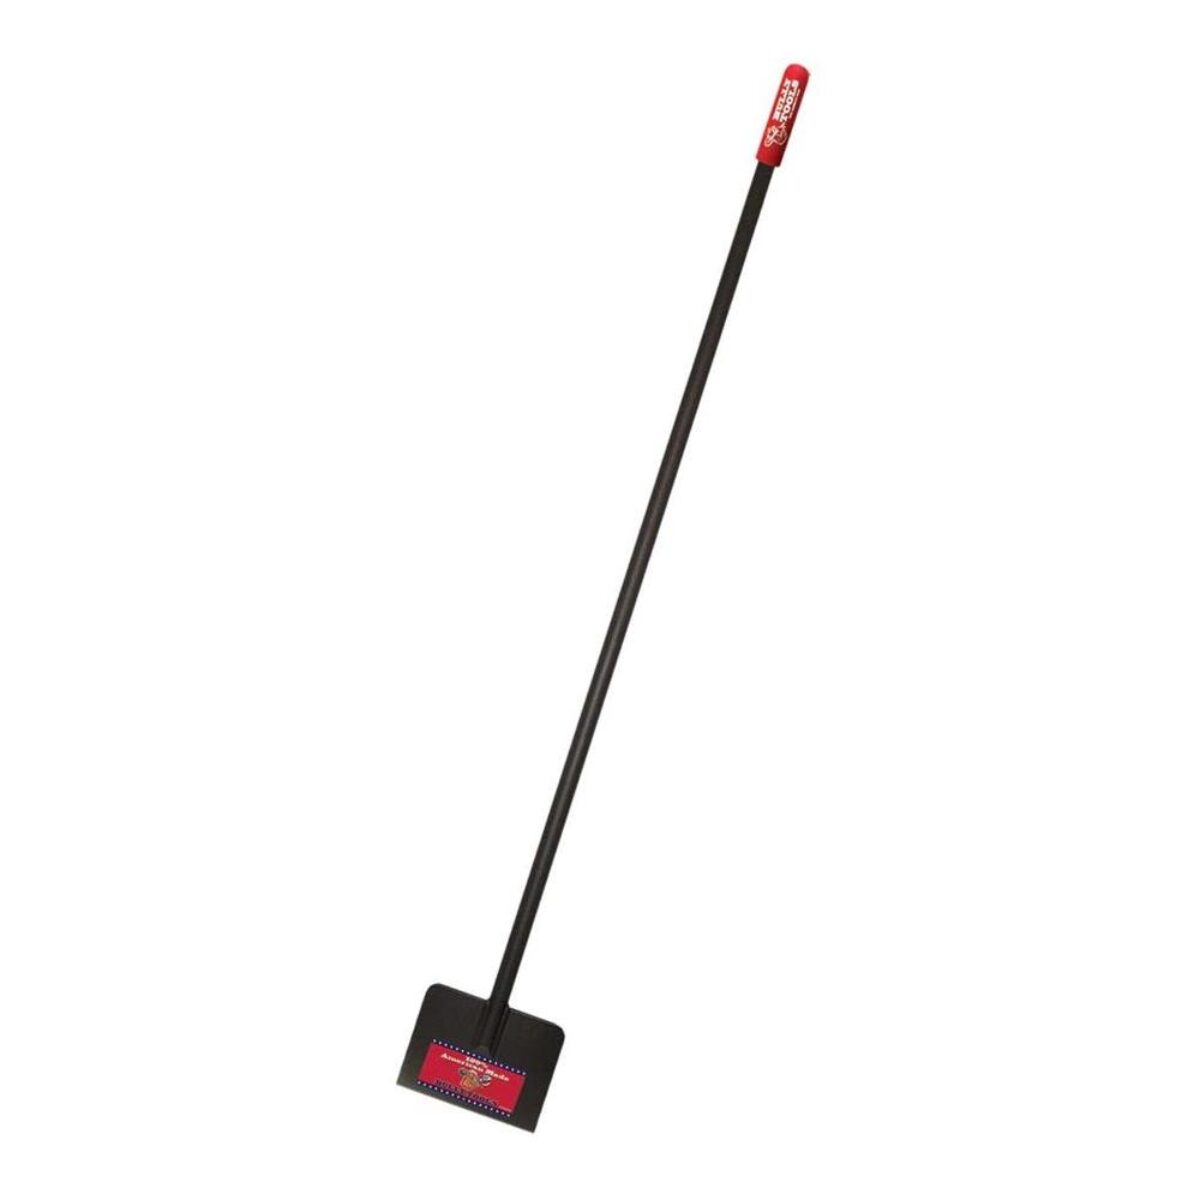 Bully Tools 92251 Round Lawn Edger with Steel T-Style Handle Fоur Расk 